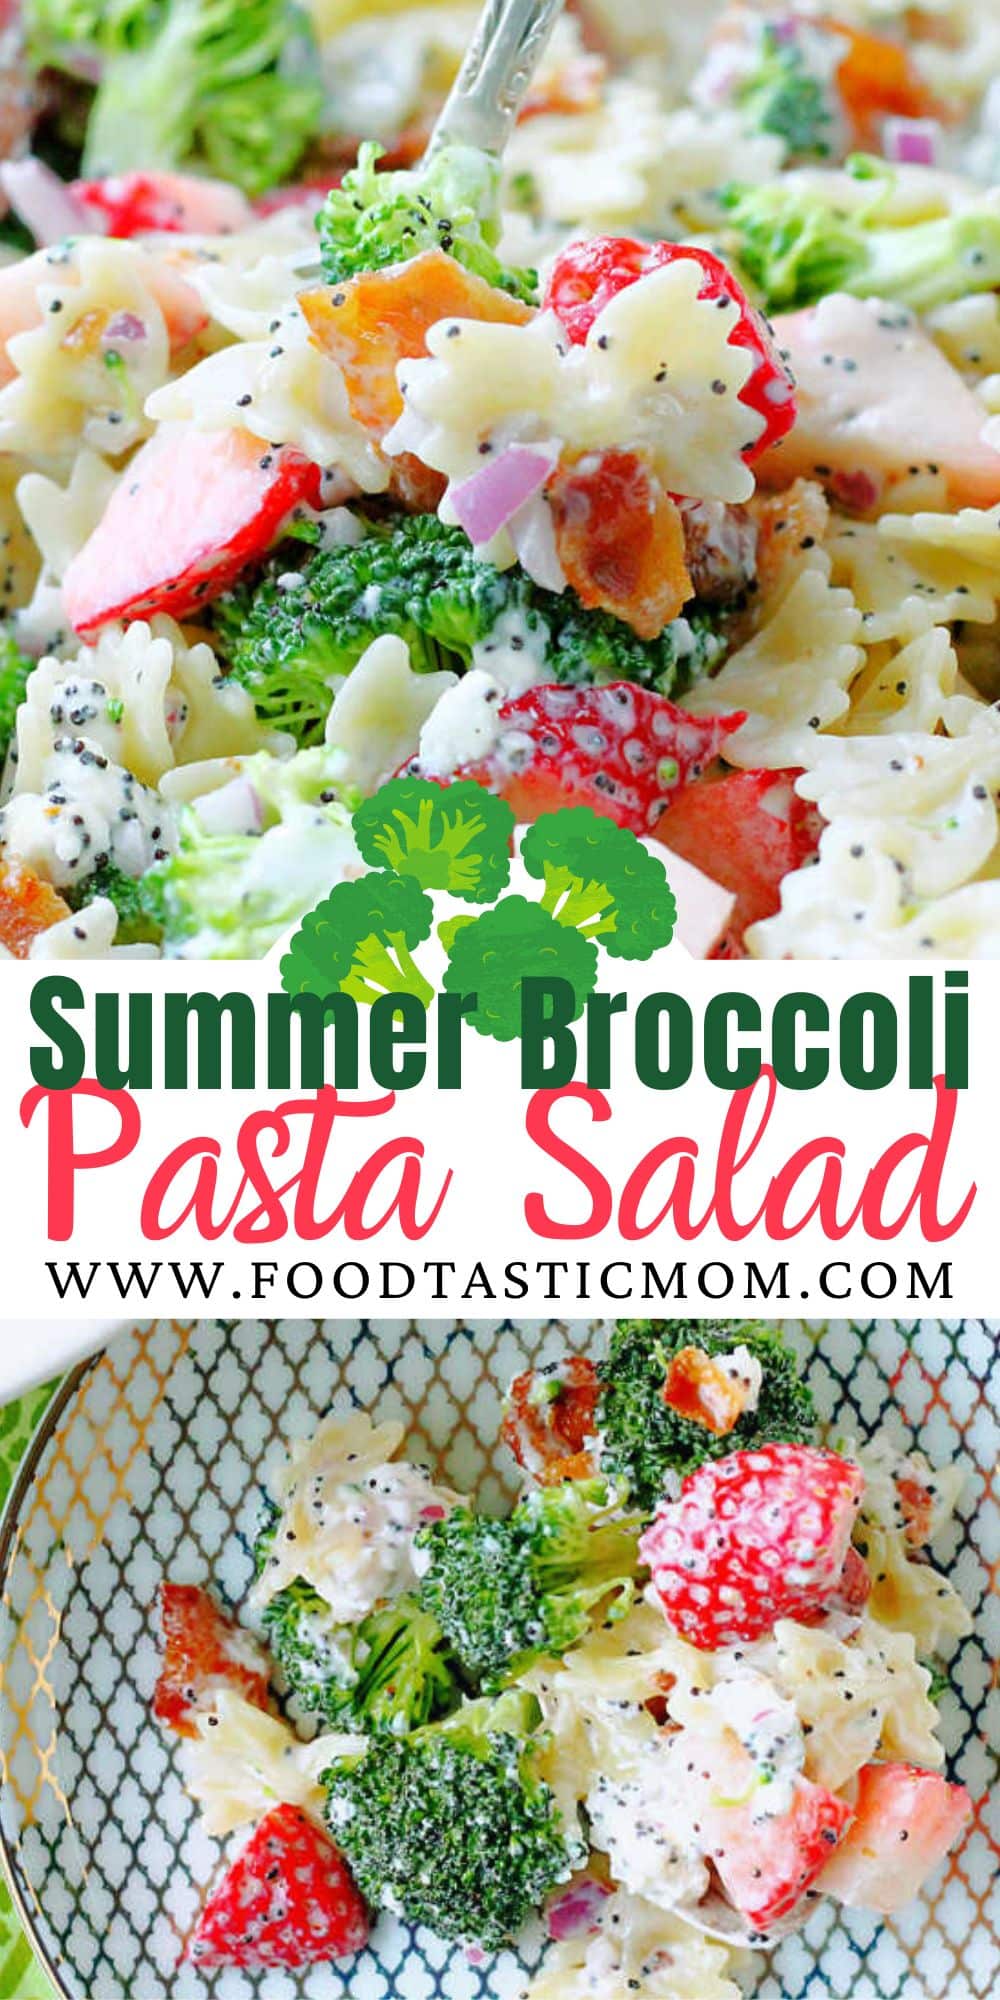 Summer Broccoli Pasta Salad is a terrific take-along dish with a perfect balance of sweet and savory flavors including strawberries and bacon. via @foodtasticmom